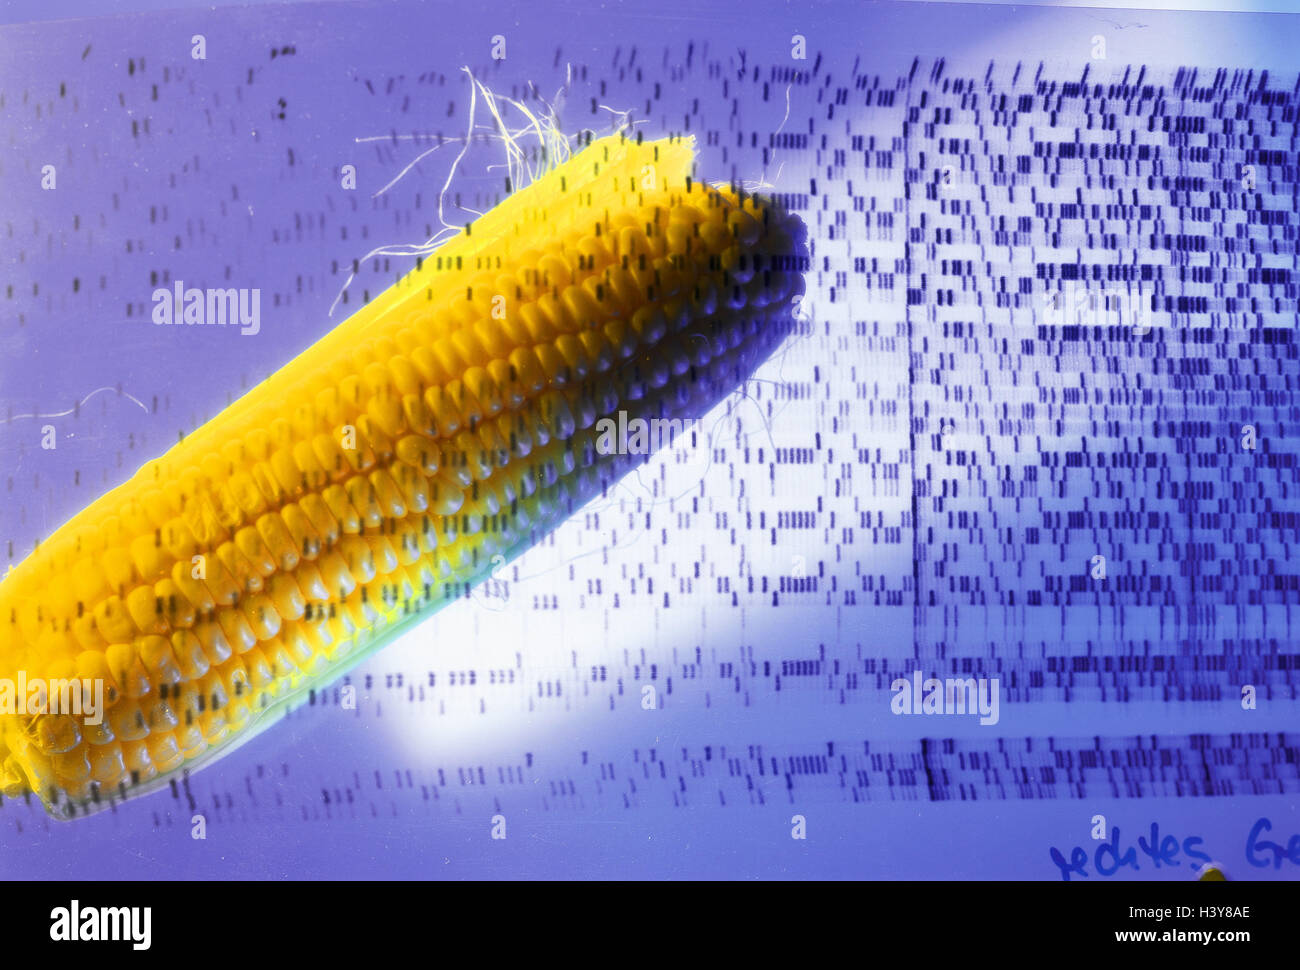 Corncobs, genetic-manipulated, DNA sequences, DNA Fingerprint method, sandwich recording, chemical laboratory, icon, food, genetic engineering, maize, nutrition, research, maneuver, genetic engineering, Stock Photo